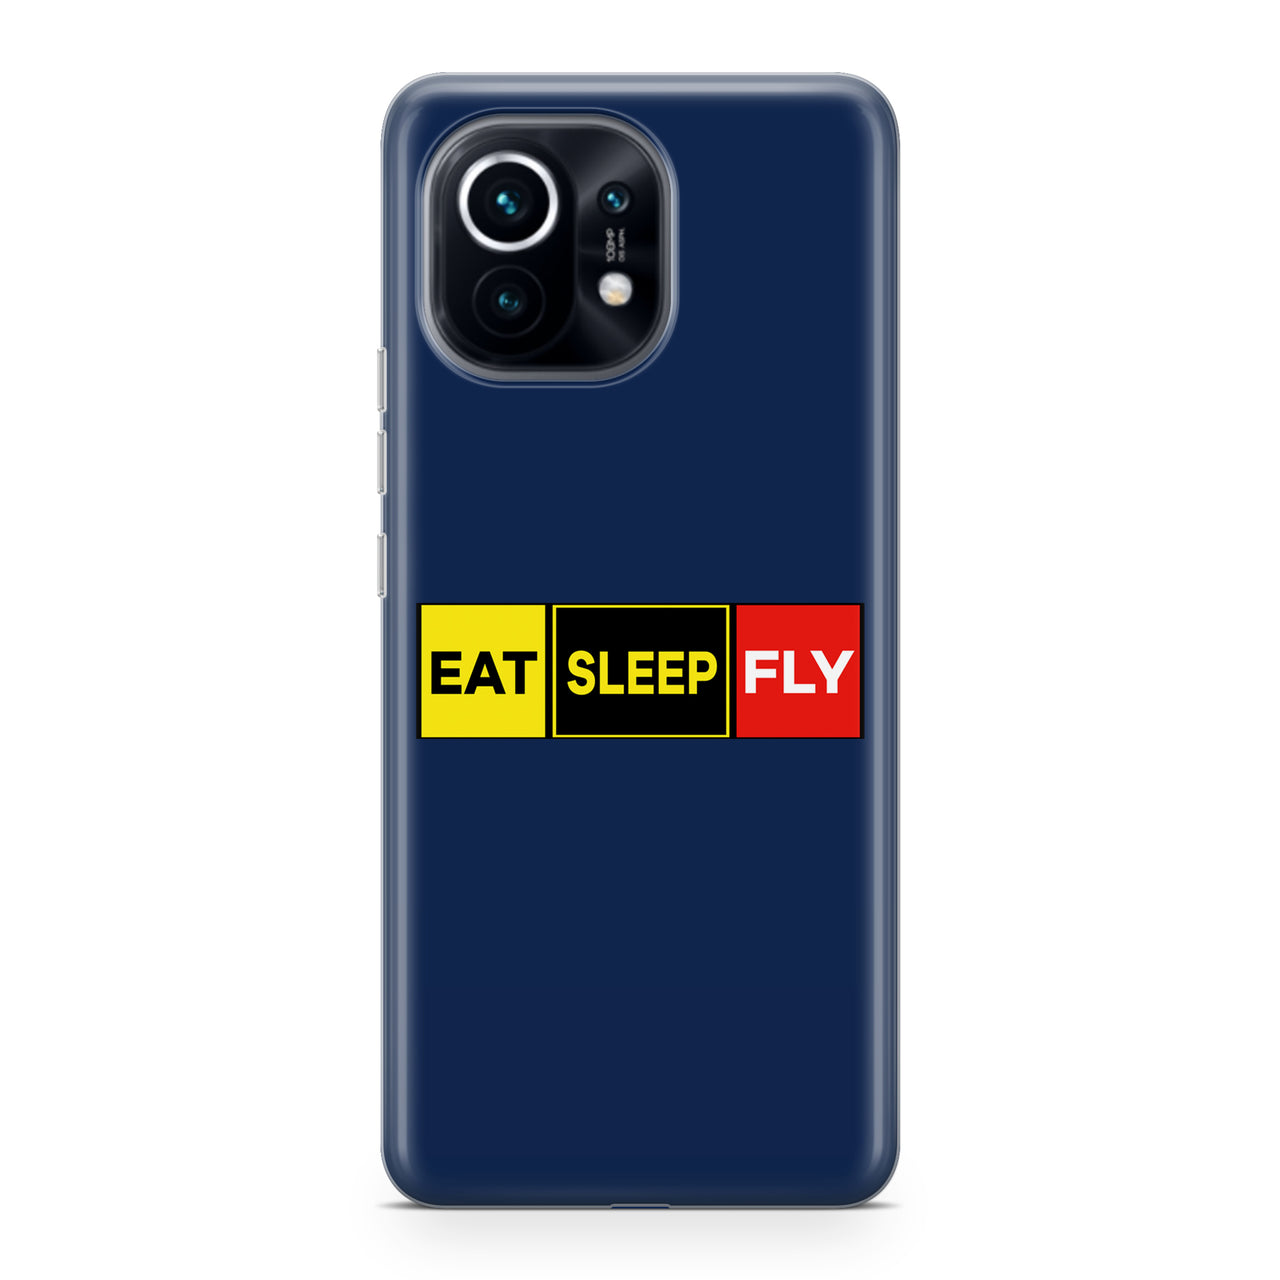 Eat Sleep Fly (Colourful) Designed Xiaomi Cases